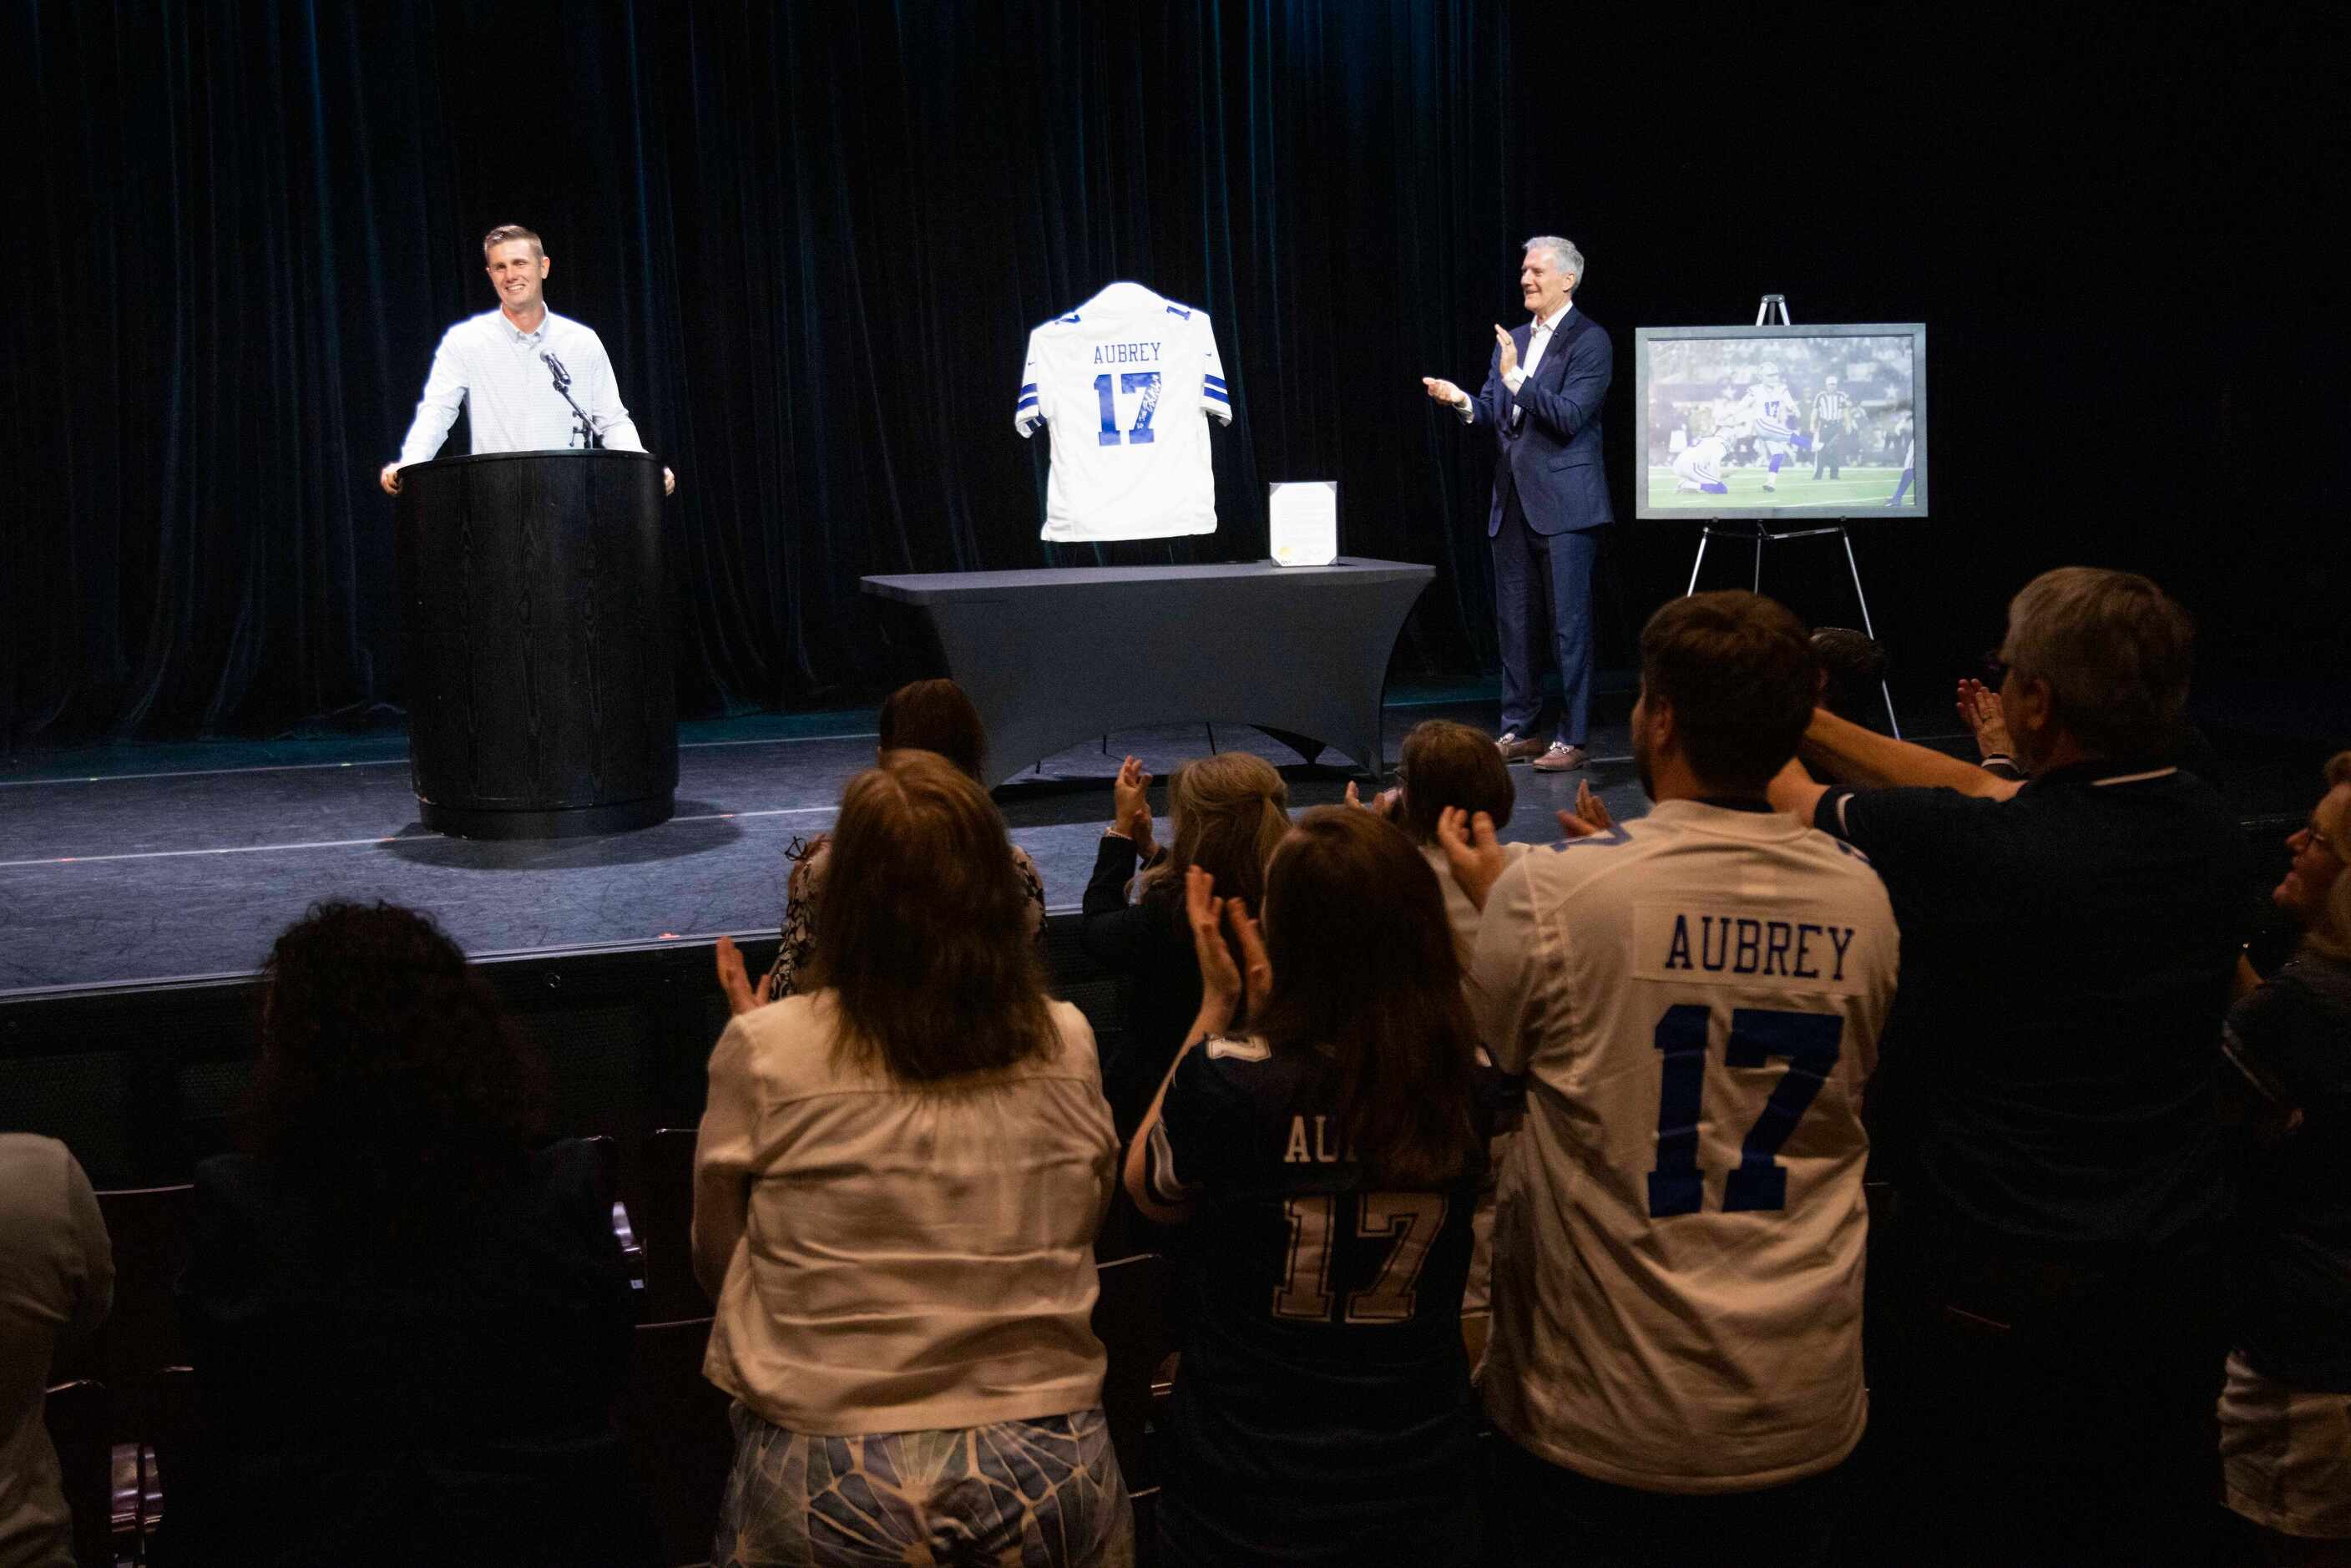 Plano native and Dallas Cowboys kicker Brandon Aubrey speaks after being presented the key...